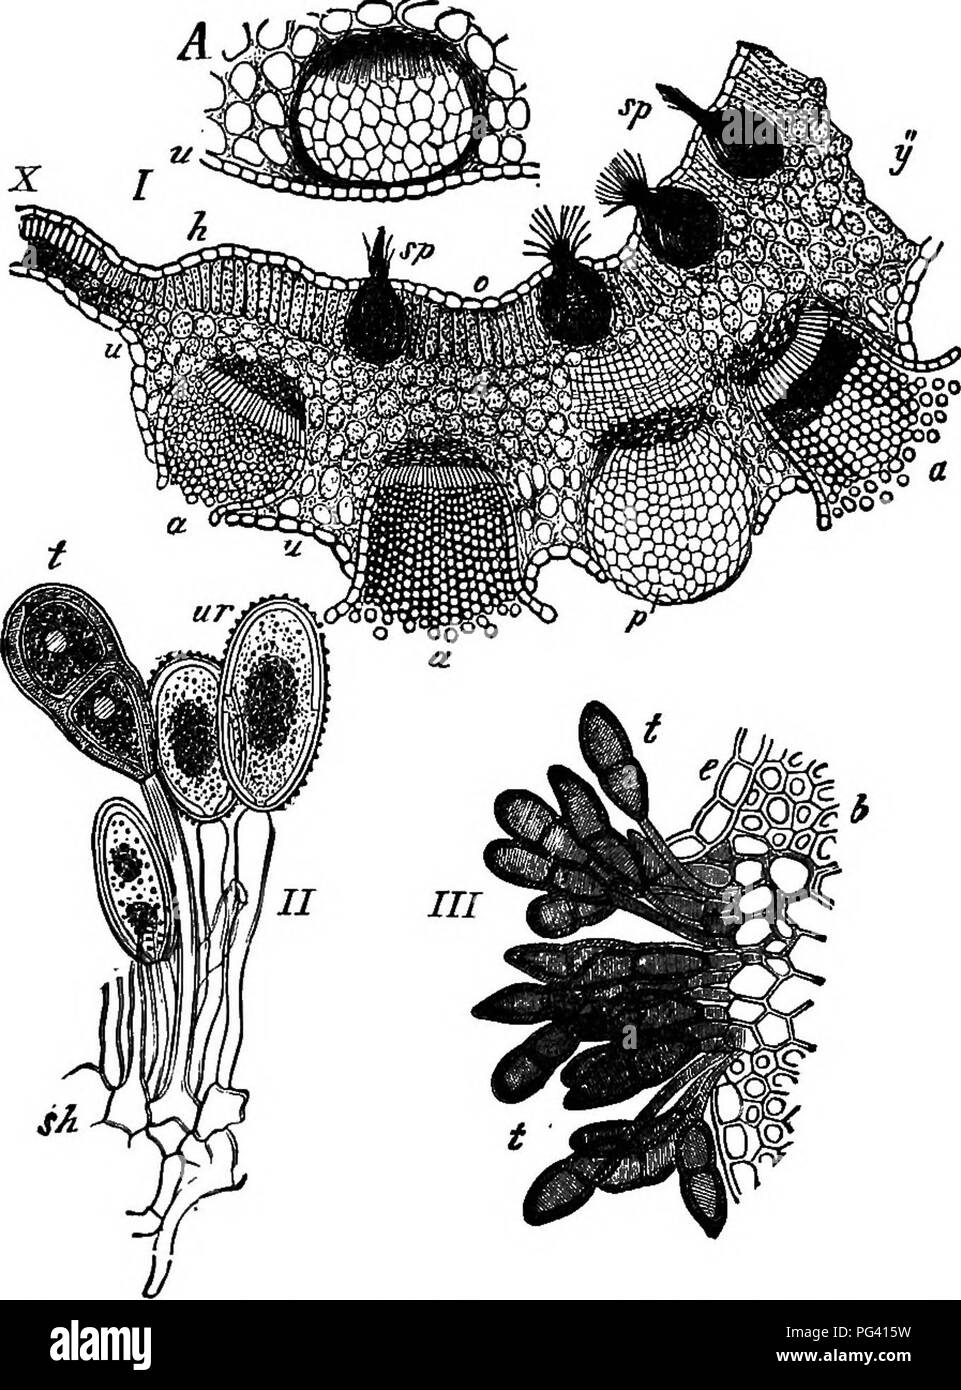 . The essentials of botany. Botany. 170 BOTANY. parasite, and at length burst through the epidermis (Fig. 94, A and I). The oonidia quickly drop out and are car-. FiG. 94.—Wheat-nist (Puccinia graminis). I, a cross-section of a Barberry- leaf through a mass of Cluster-cups; a, a, a, cups opened and slieddingr their conidia; p, and A, above, cu^s not yet opened; sp, sp, spermogones which pro- duce spermatia, whose function is not Icnown. ii, three Red-rust spores, ttr, on stalks: t, a Black-rust spore. 7/J, a mass of Black-rust spores bursting through the epidermis, e, of a leaf. All highly mag Stock Photo